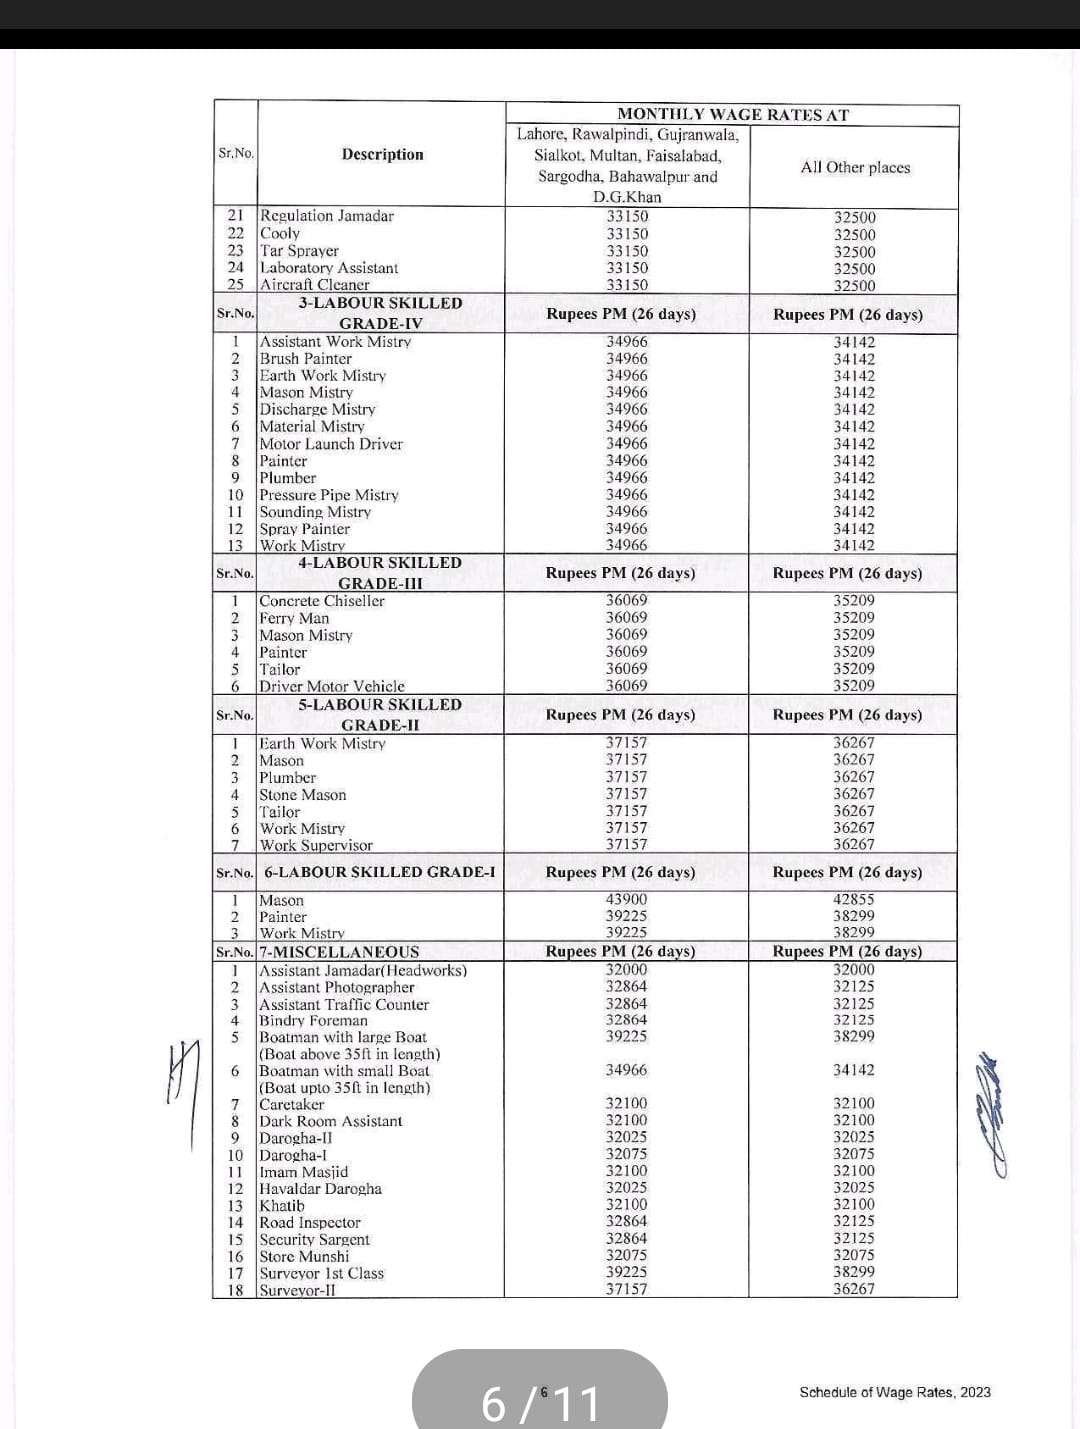 Notification Schedule of Wage Rate 2023 Punjab